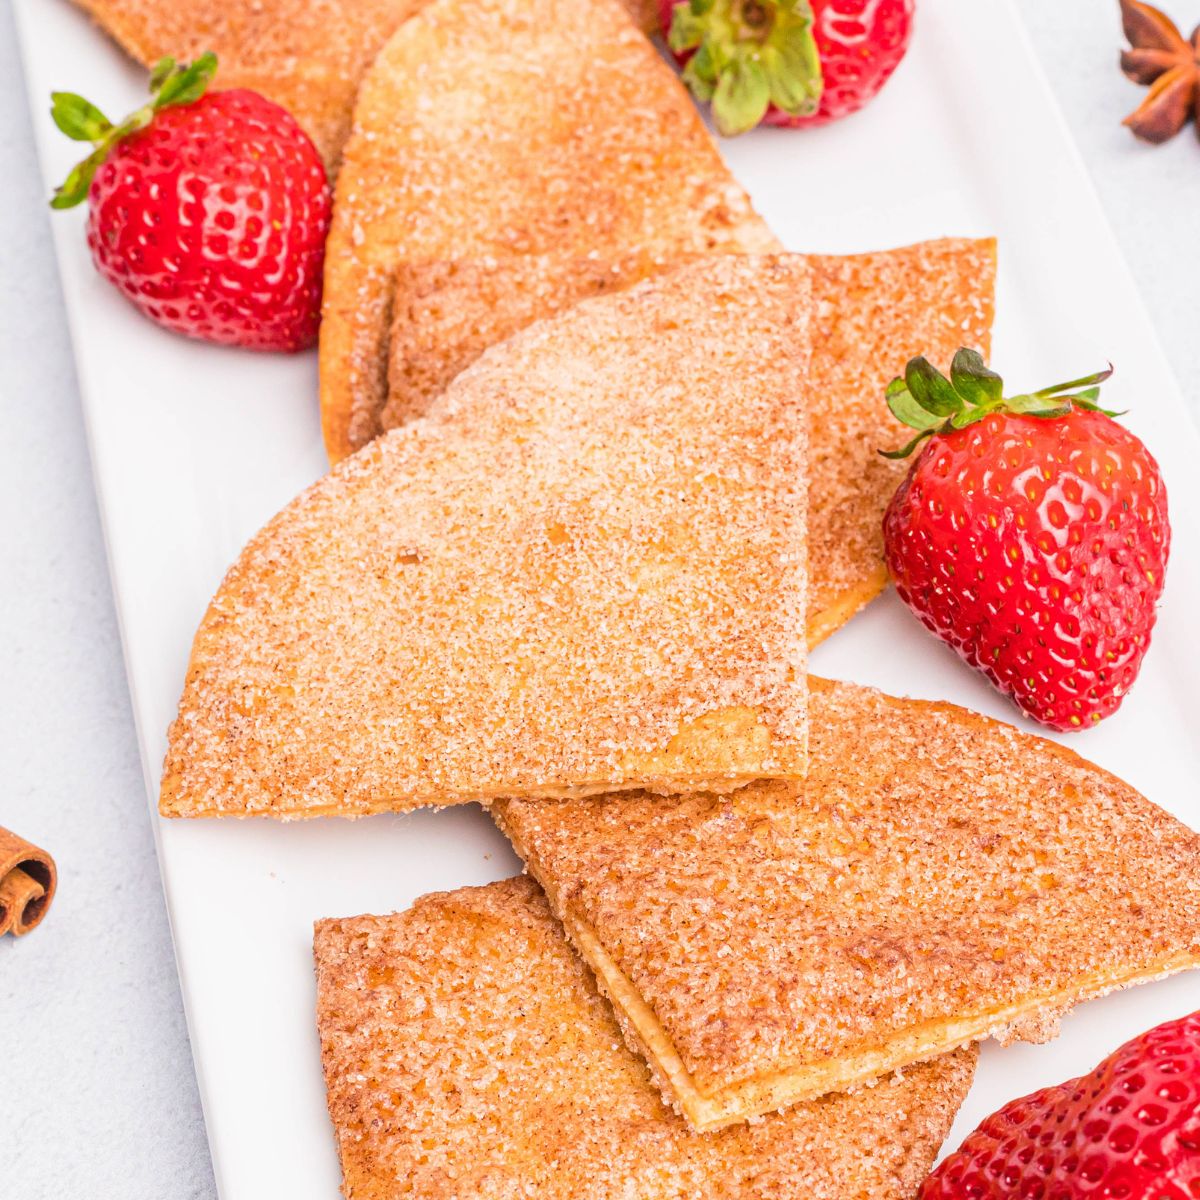 Cinnamon and sugar coated tortilla chips on a white plate with fresh strawberries